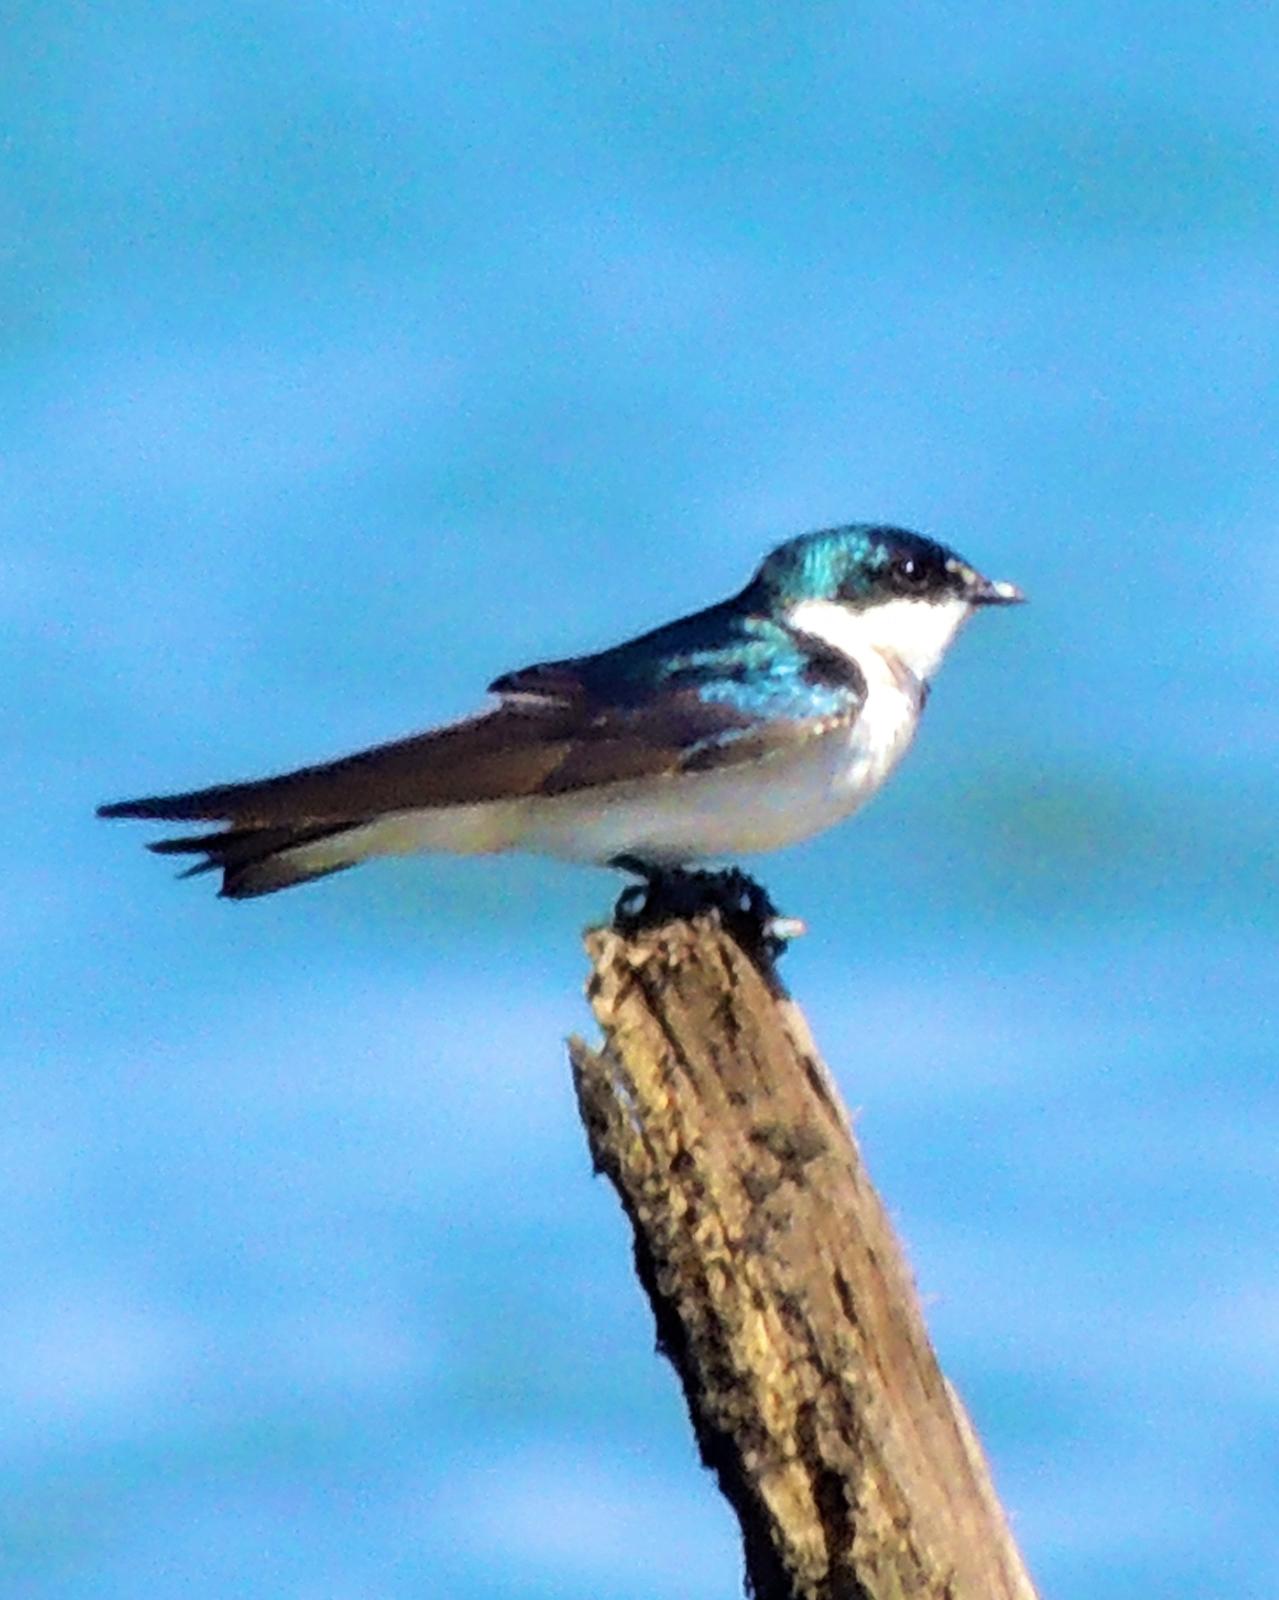 Mangrove Swallow Photo by Andres Duarte